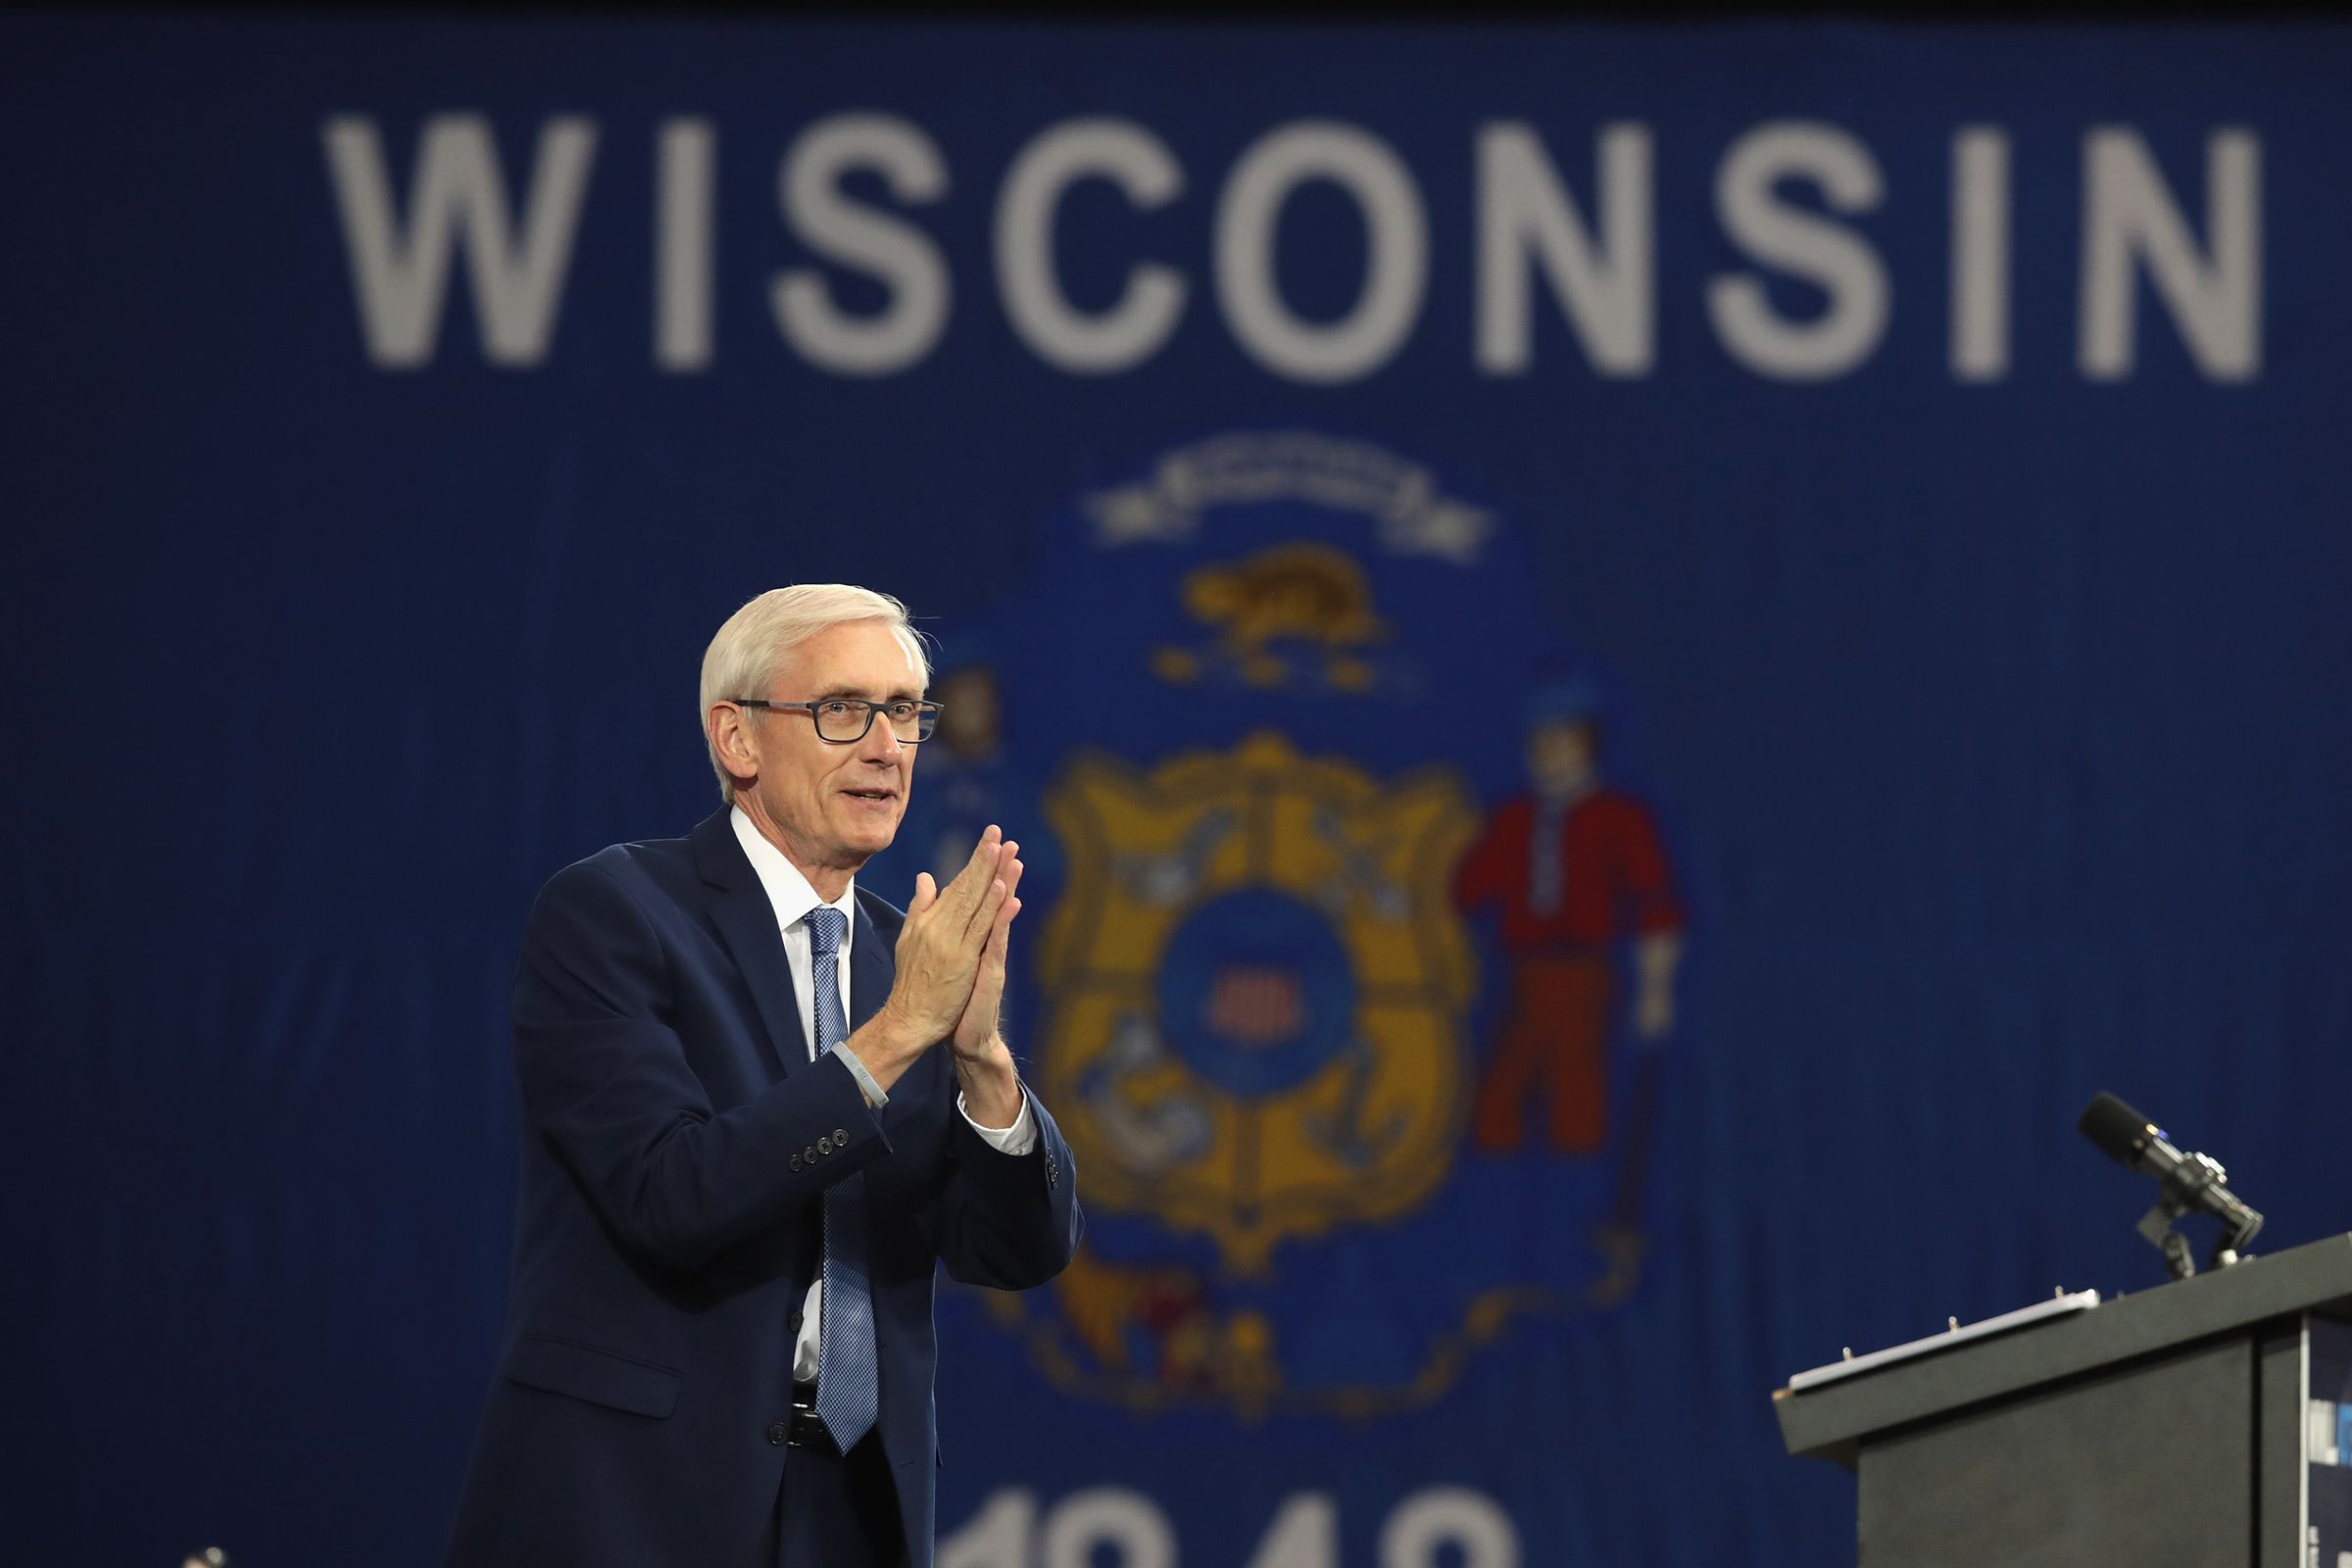 Wisconsin Governor Tony Evers stands in front of an enormous Wisconsin state flag, his palms pressed together